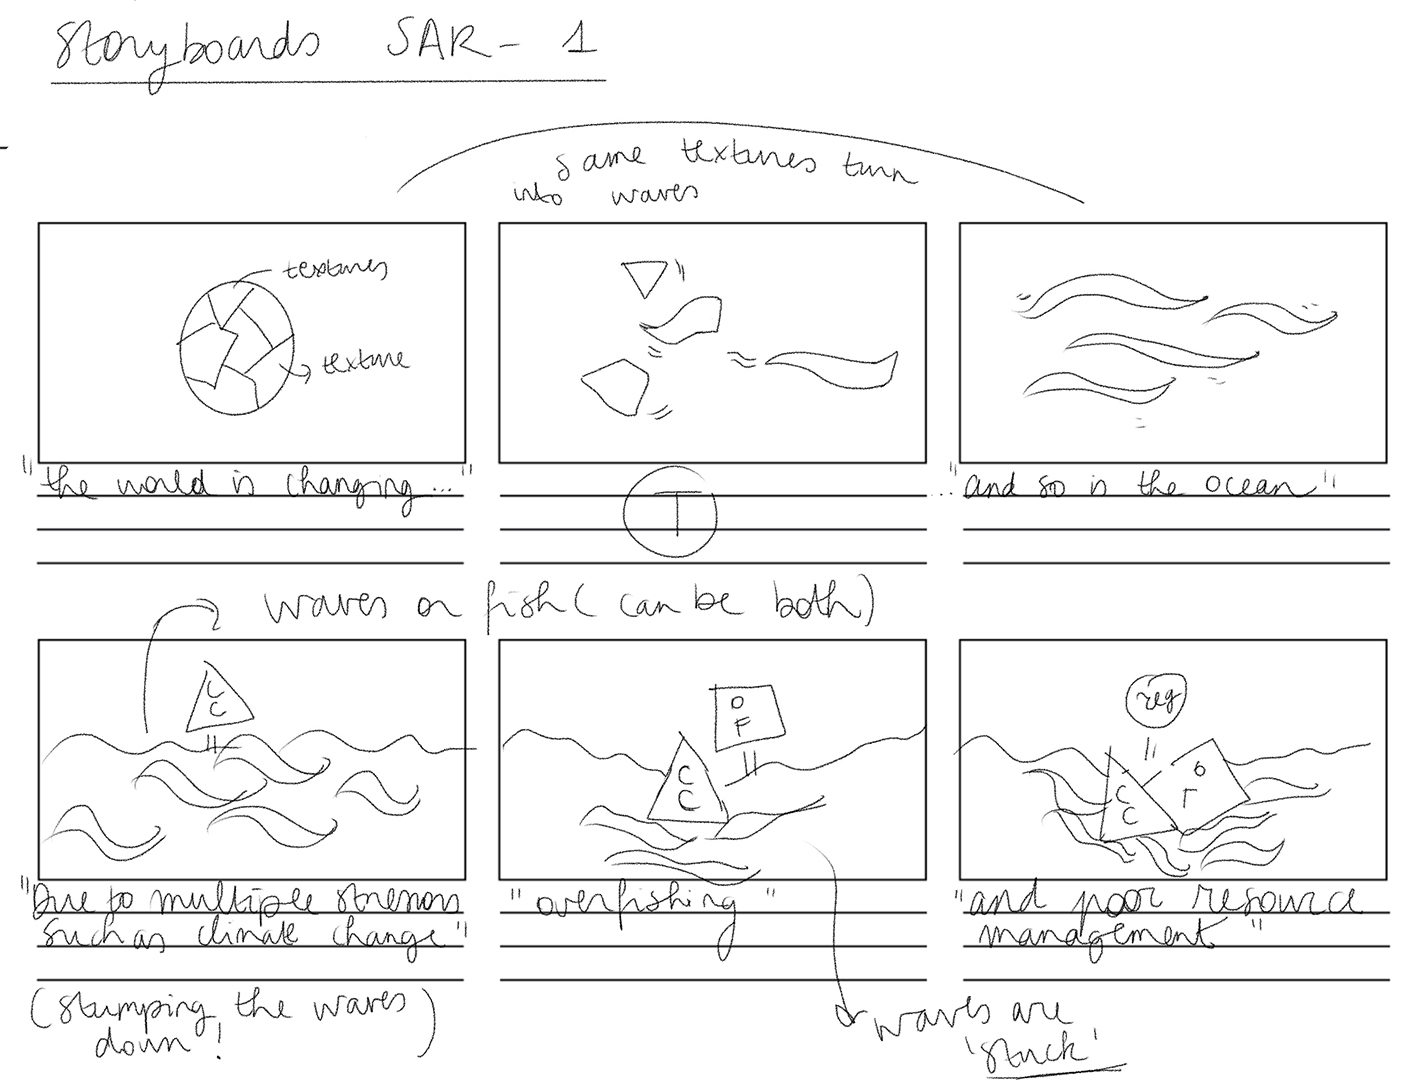 storyboards_part1